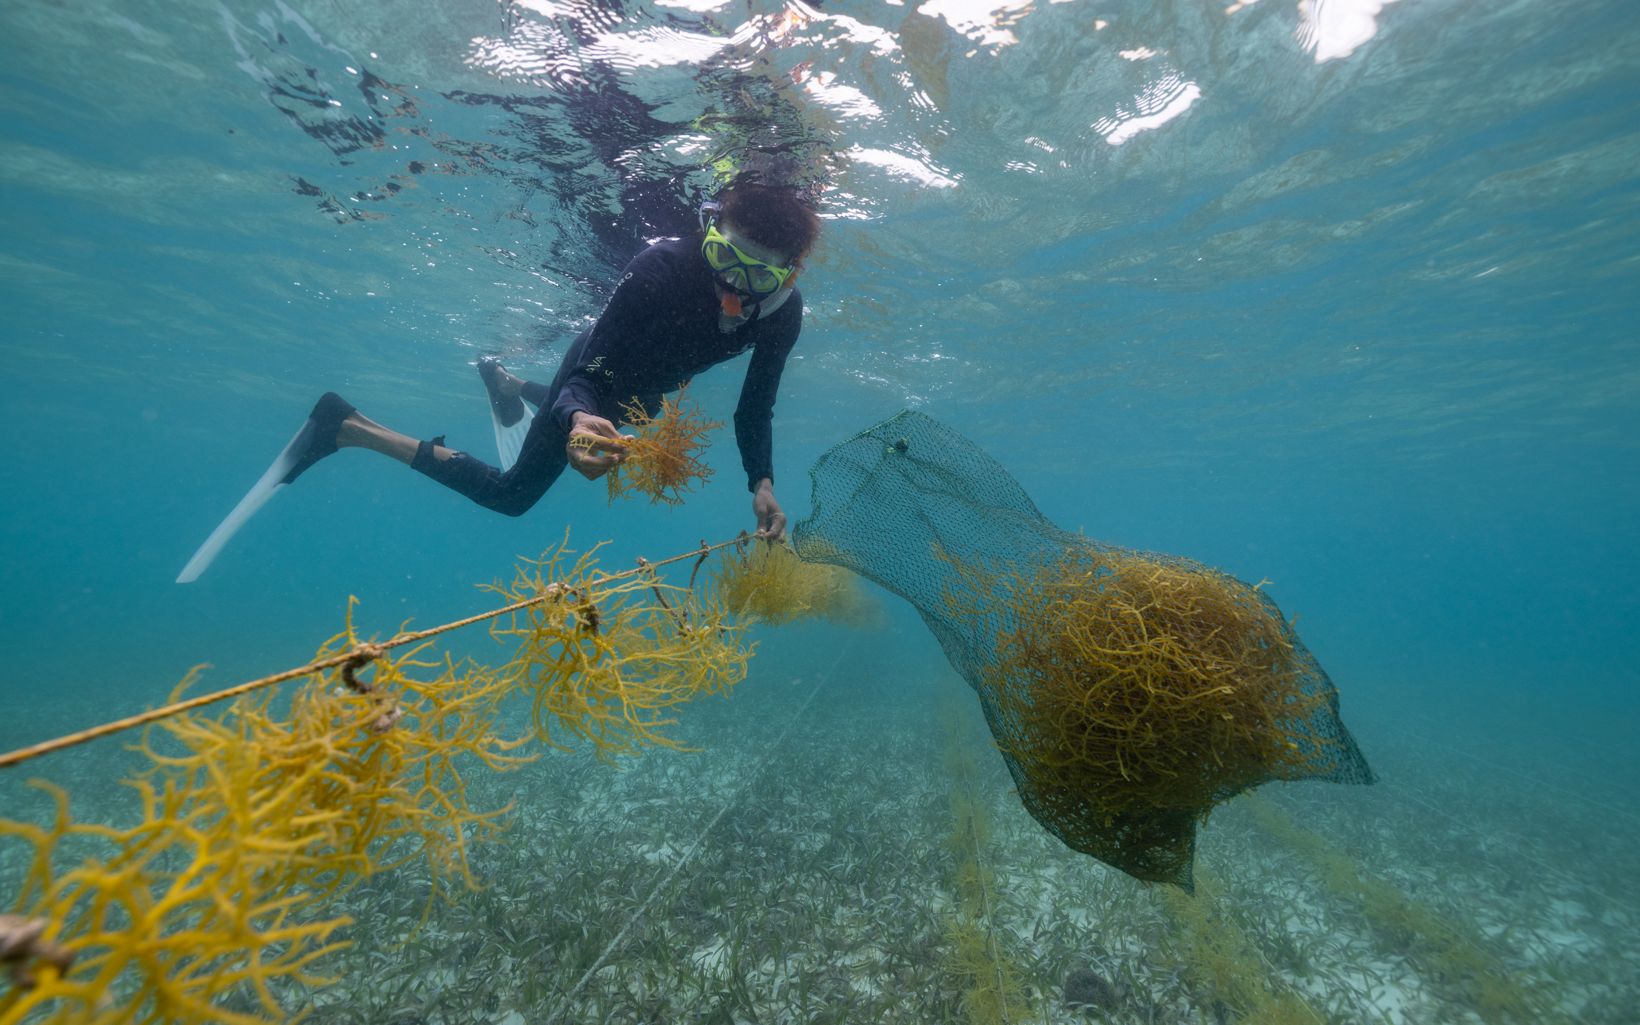 Bag It Up Mariko Wallen harvests a tangle of seaweed from a long cord. Belizeans use this type of seaweed in cooking and as an ingredient in punches and smoothies. © Jennifer Adler